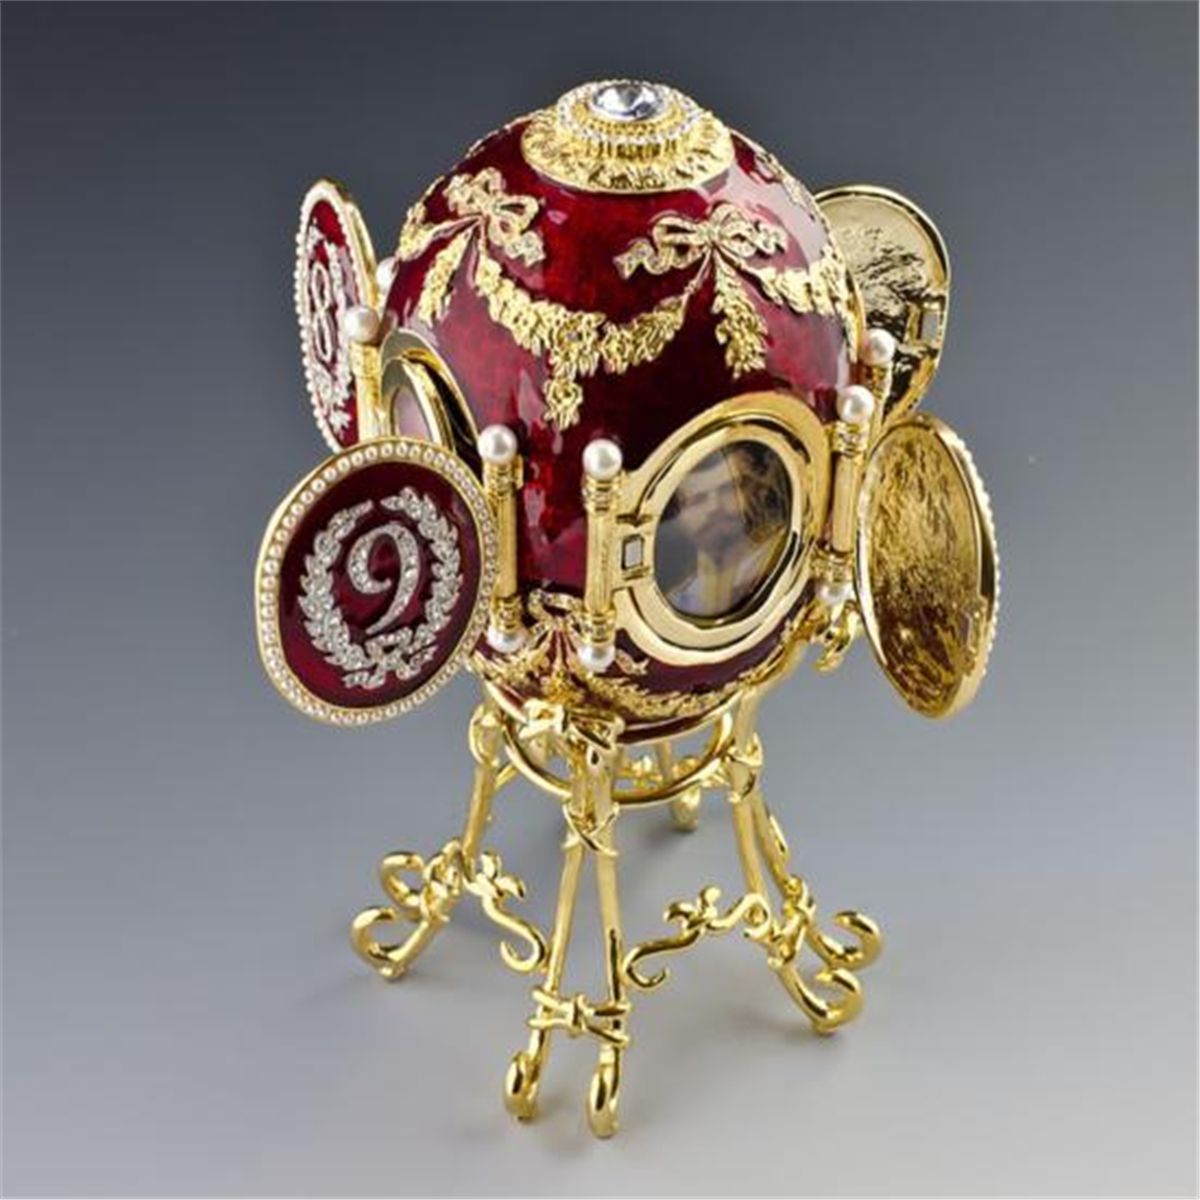 The Caucasus Egg is a jewelled enameled Easter egg made by Michael Perkhin under the supervision of Peter Carl Fabergé in 1893. The egg was made for Alexander III of Russia, who presented it to his wife, Empress Maria Feodorovna.